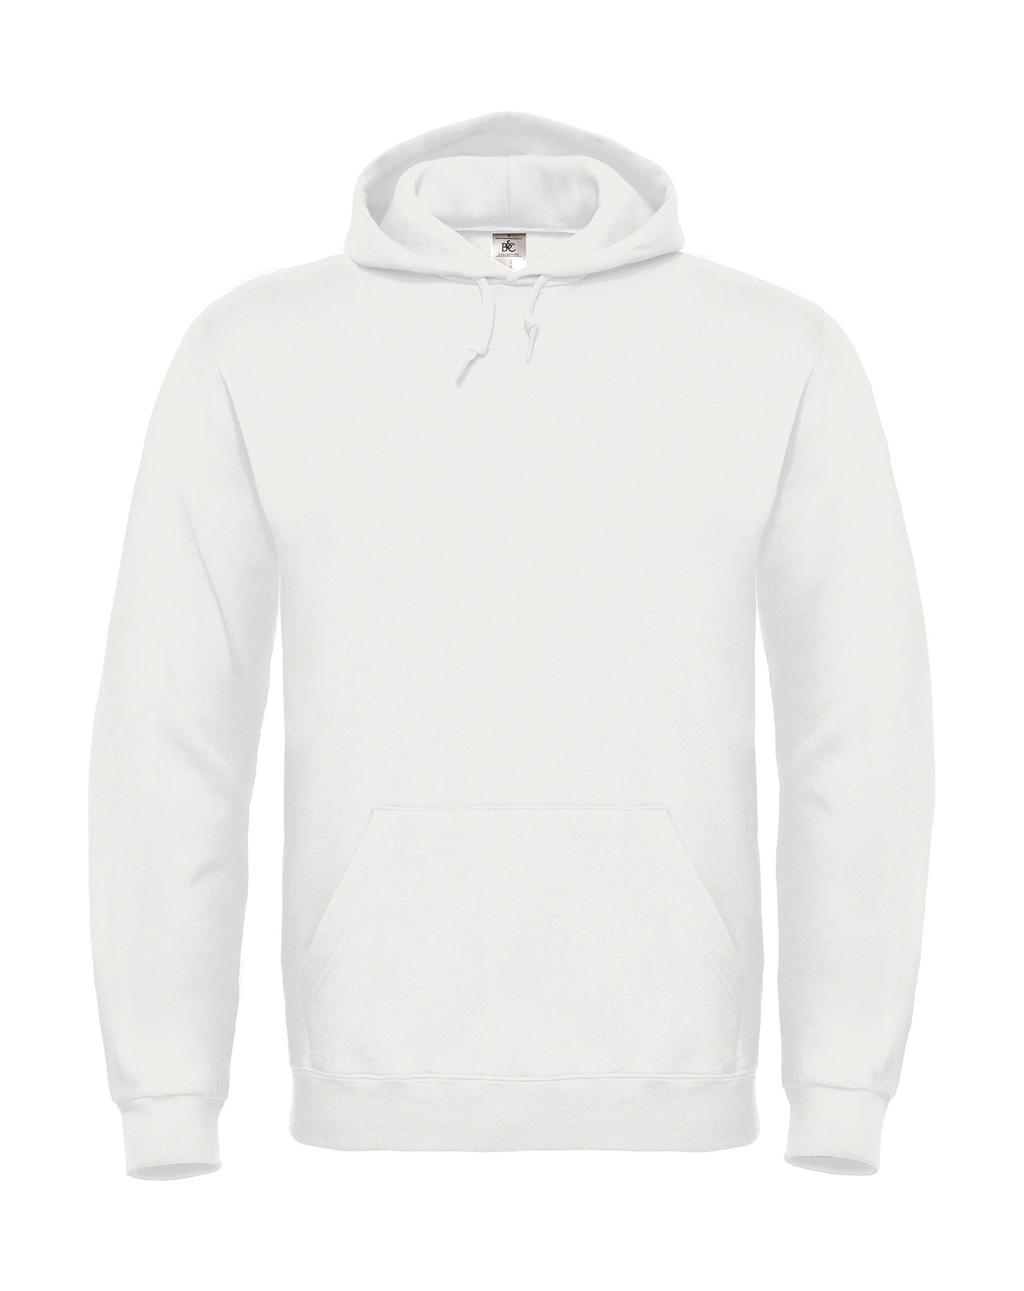  ID.003 Cotton Rich Hooded Sweatshirt in Farbe White